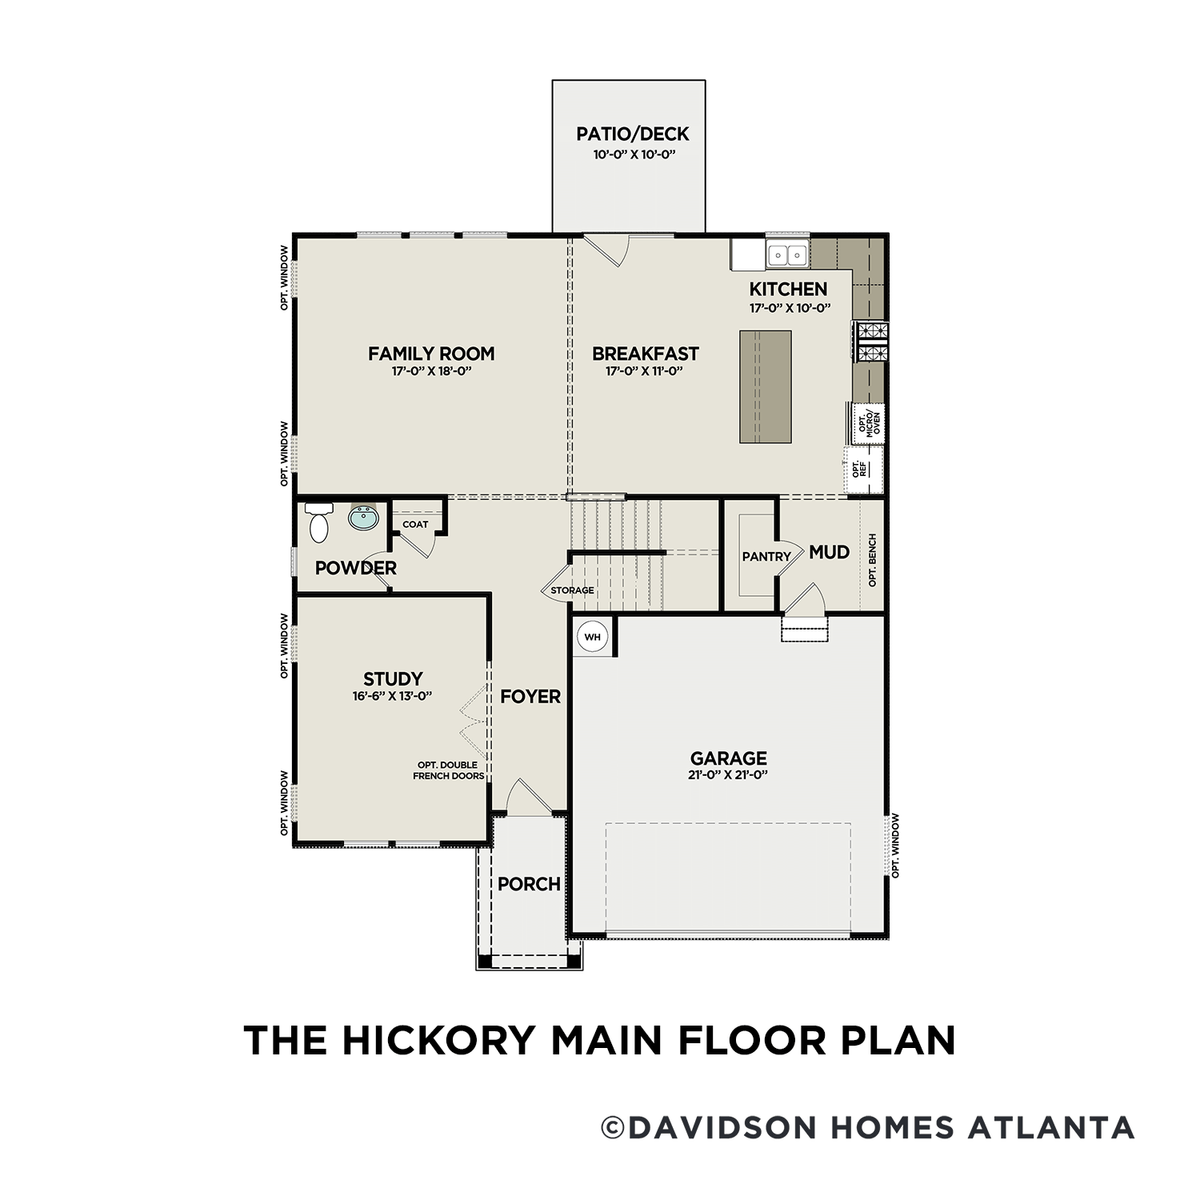 1 - The Hickory A buildable floor plan layout in Davidson Homes' Riverwood community.